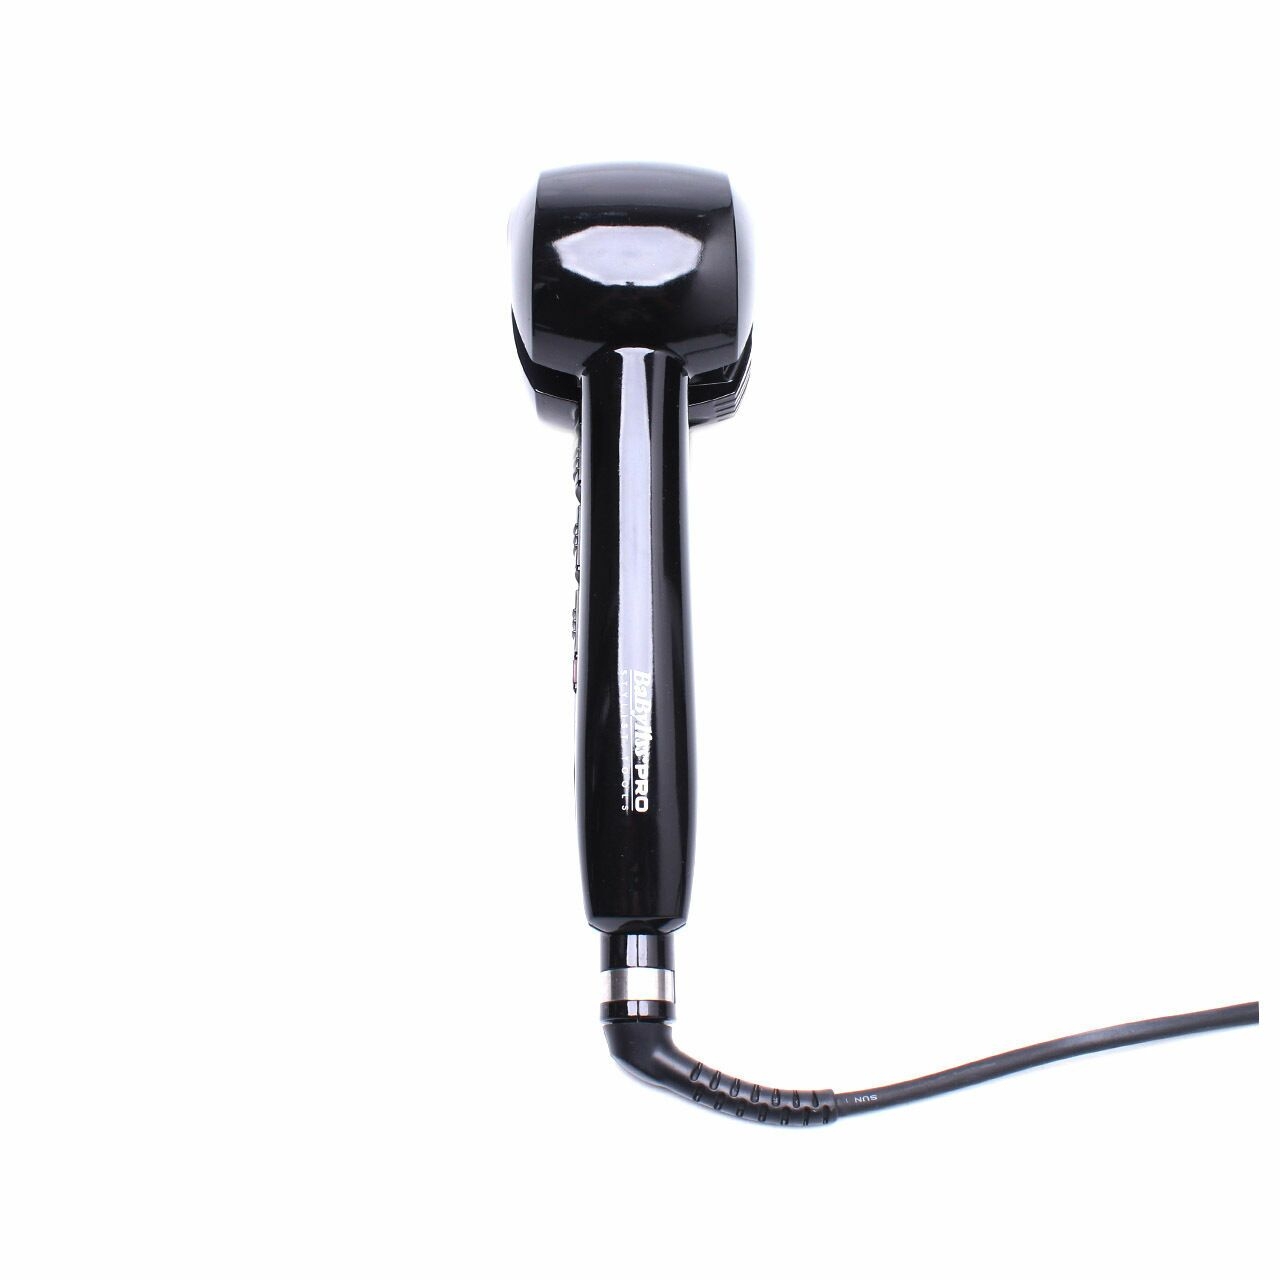 babyliss Black Miracurl Tools